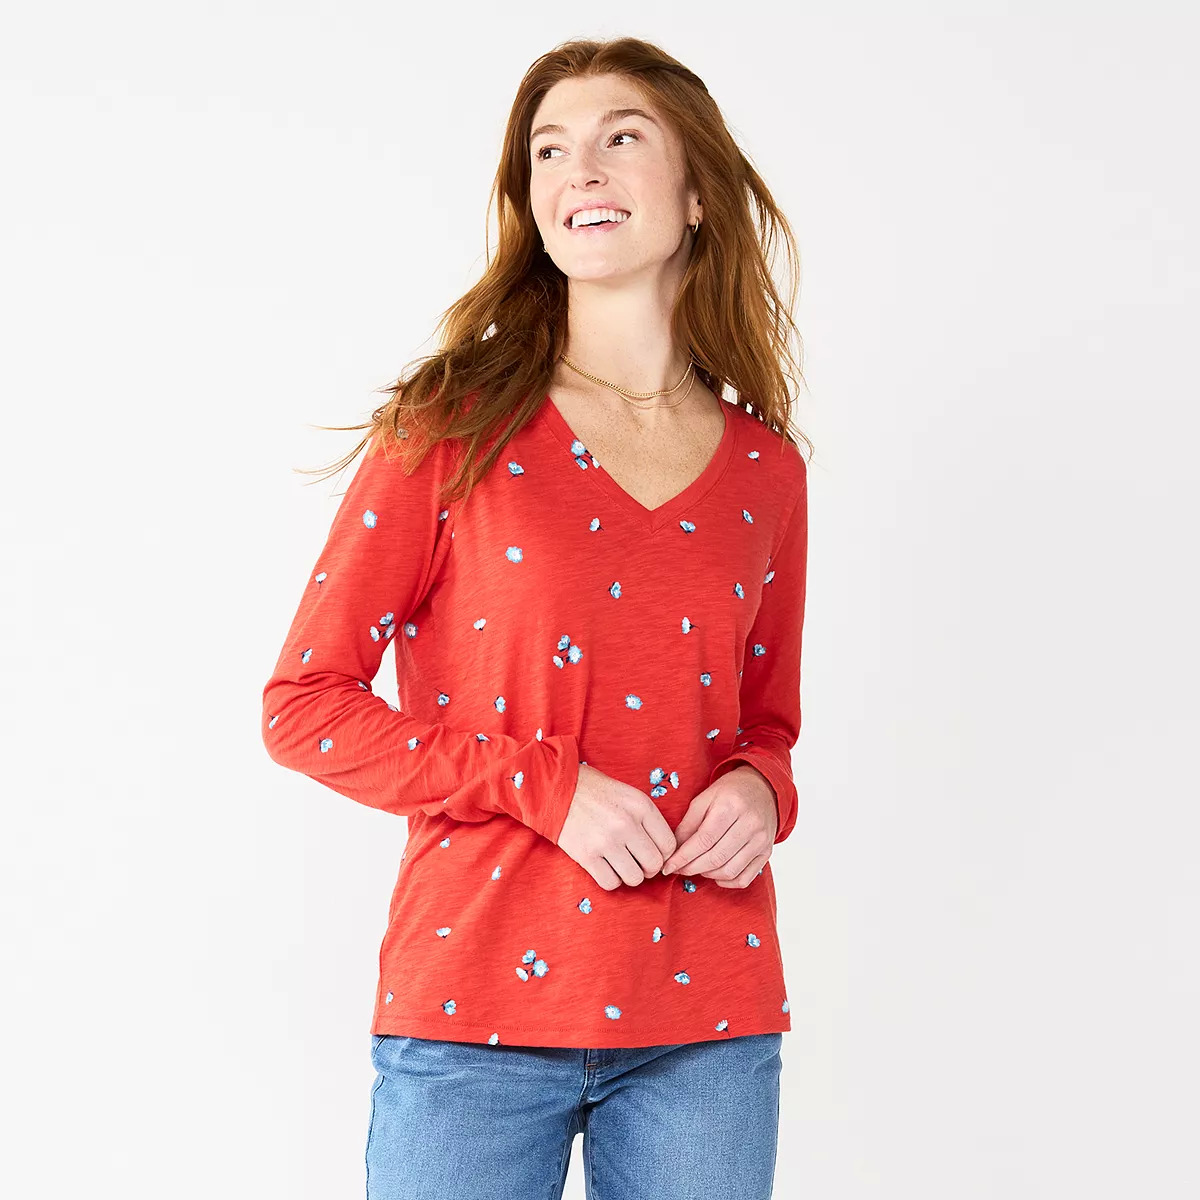 Sonoma Goods For Life Women's Everyday Long Sleeve V-Neck Top or Crewneck Top $2.40 & More + Free Shipping on $49+